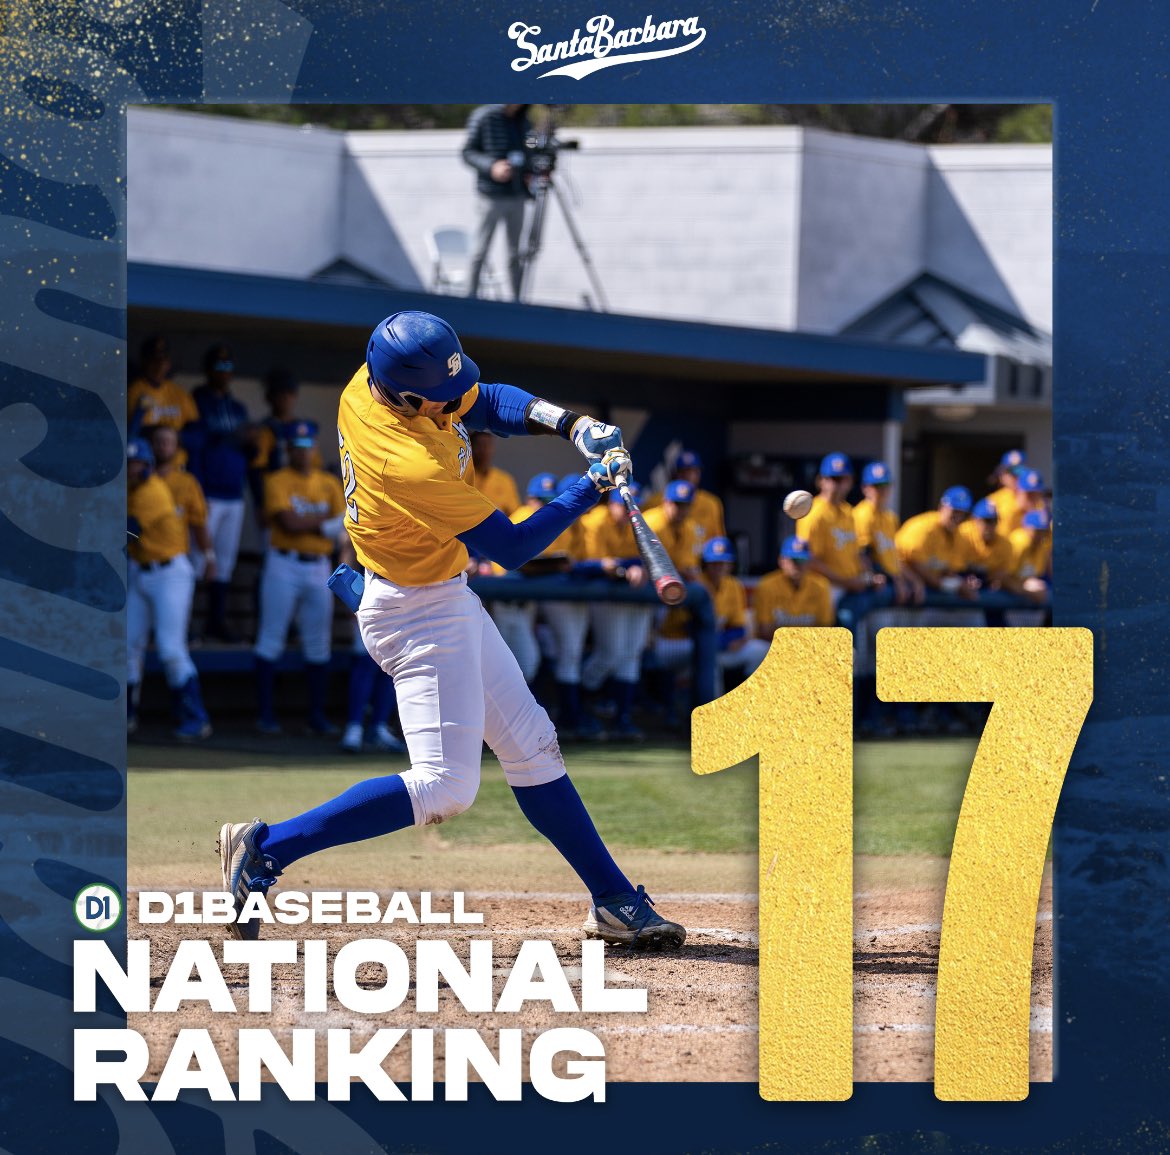 Another Top 25 nod for the Gauchos, this time it’s #17 from D1 Baseball! #GoChos